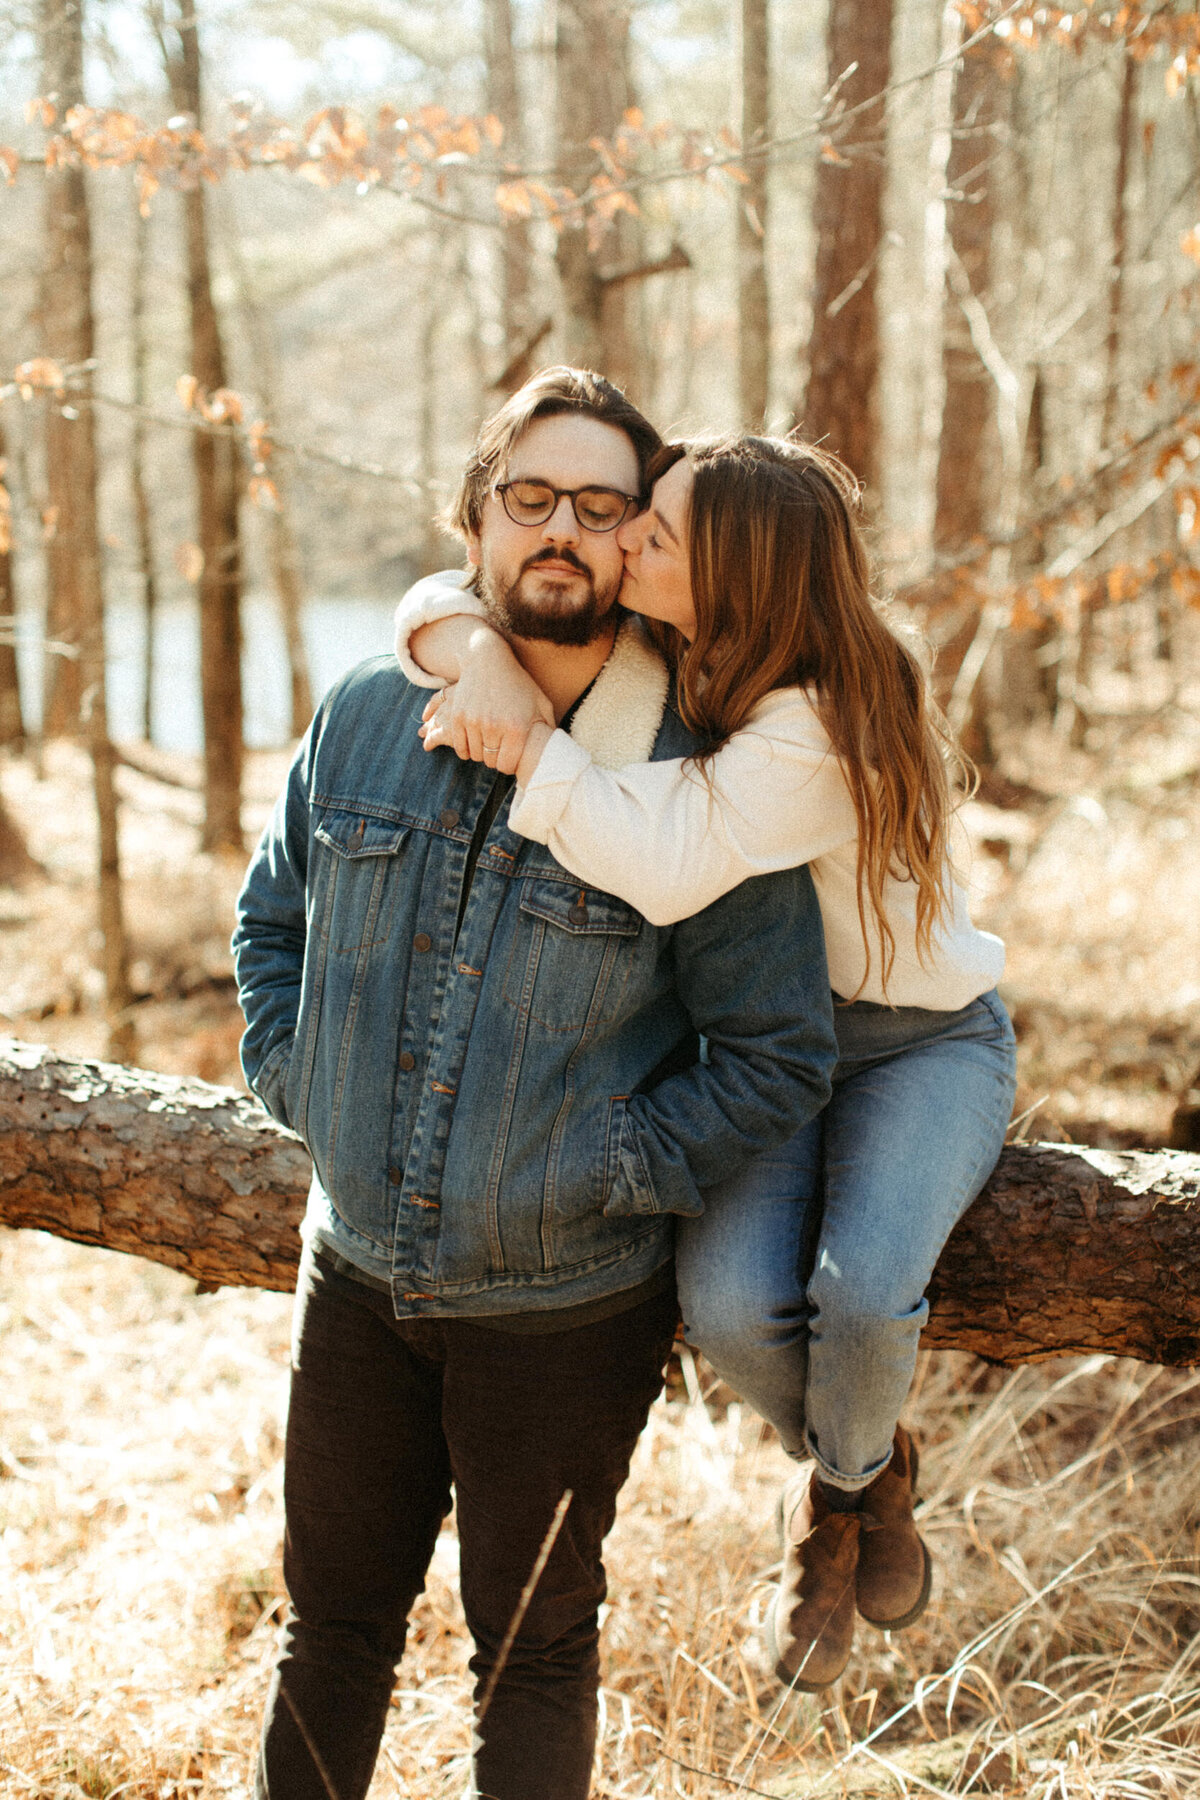 A girl is sitting on a fallen tree log in the woods while she hugs and kisses her fiancé who is standing next to her and wearing a denim jacket.